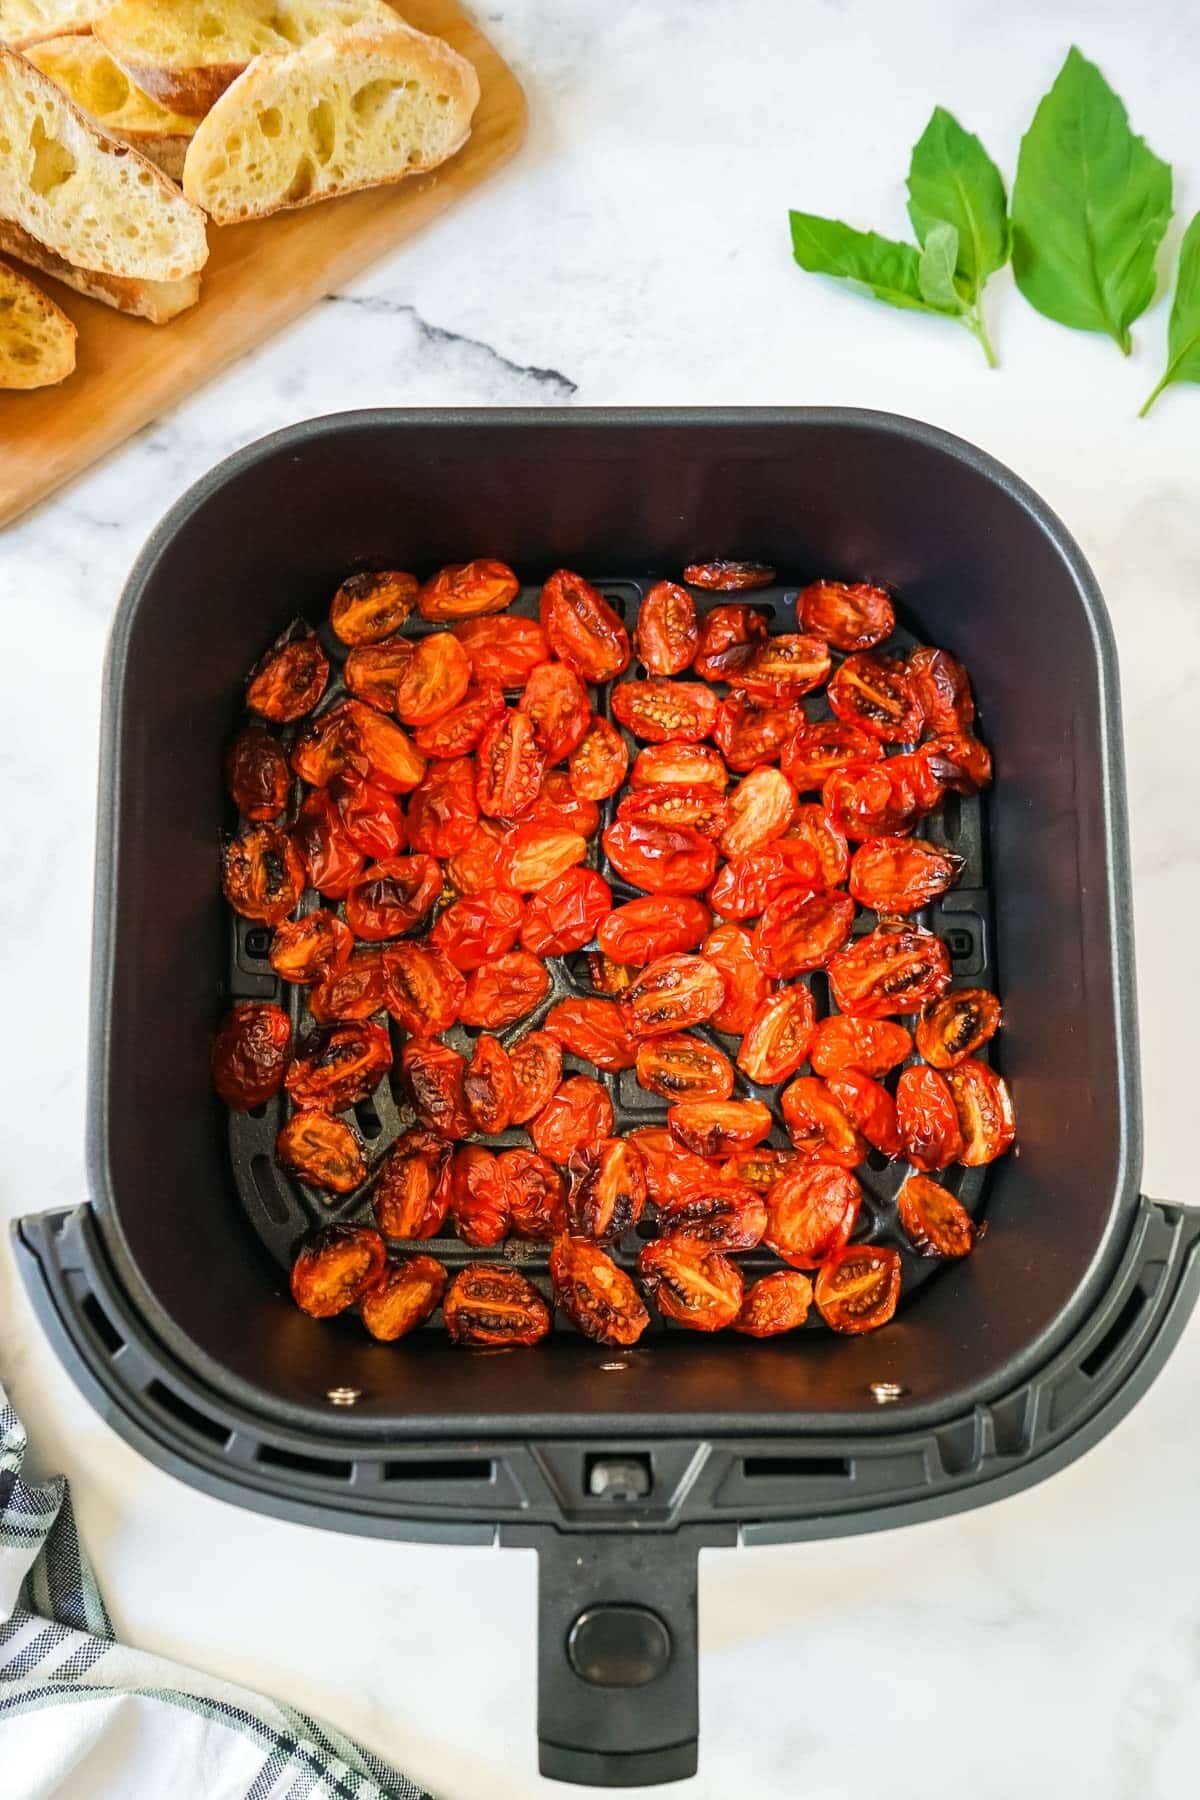 Cherry tomatoes roasted in an air fryer.